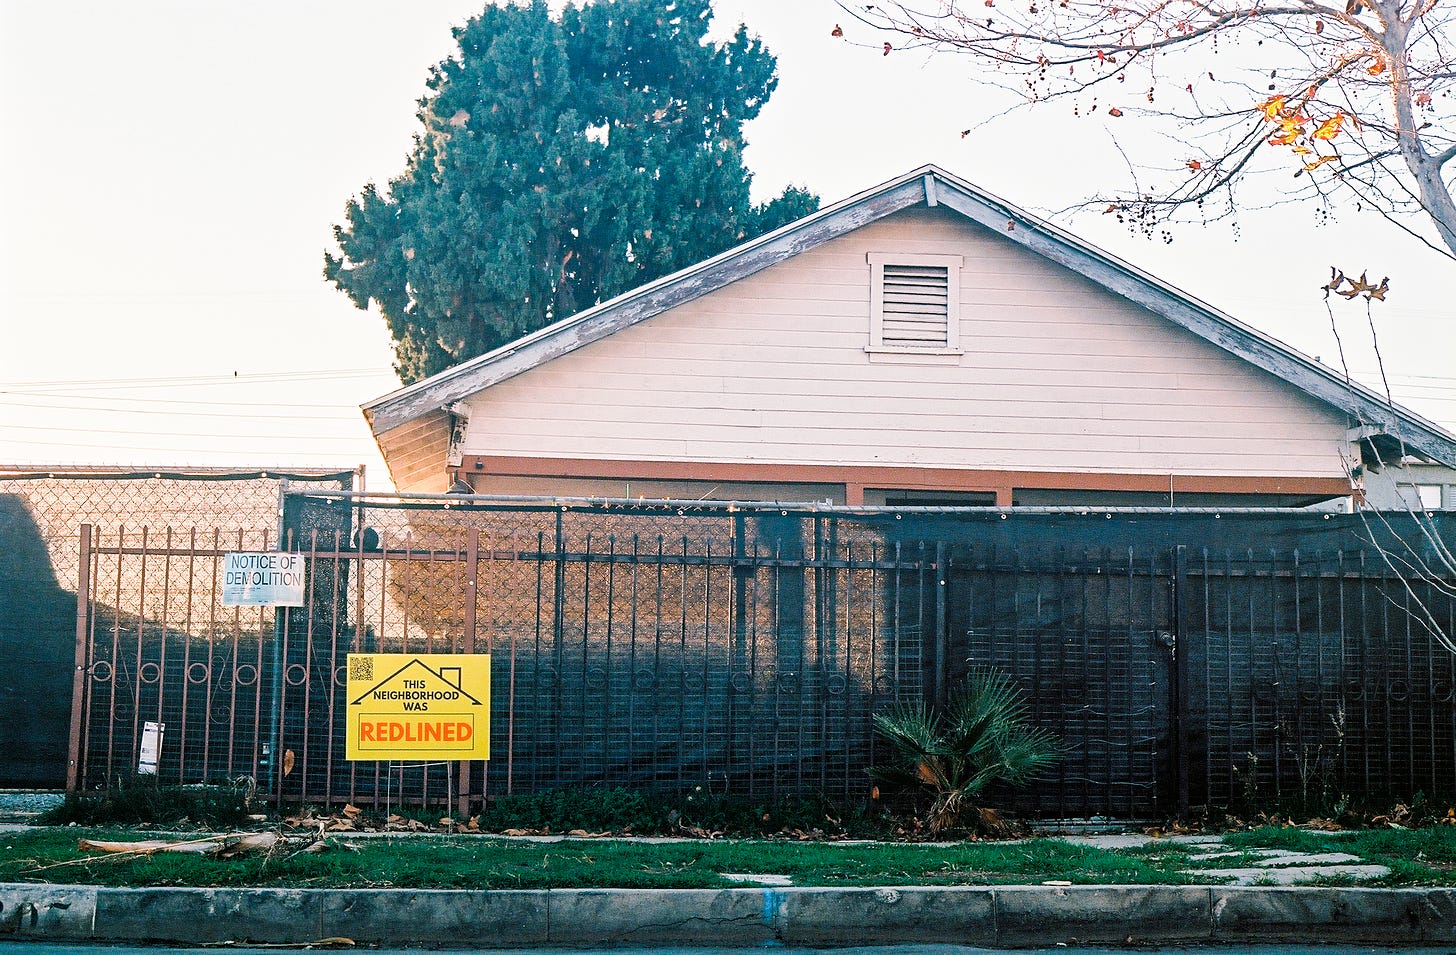 Photograph of a pink house behind a metal fence with a Notice of Demolition sign and one of my yard signs in the parkway in front of the home.